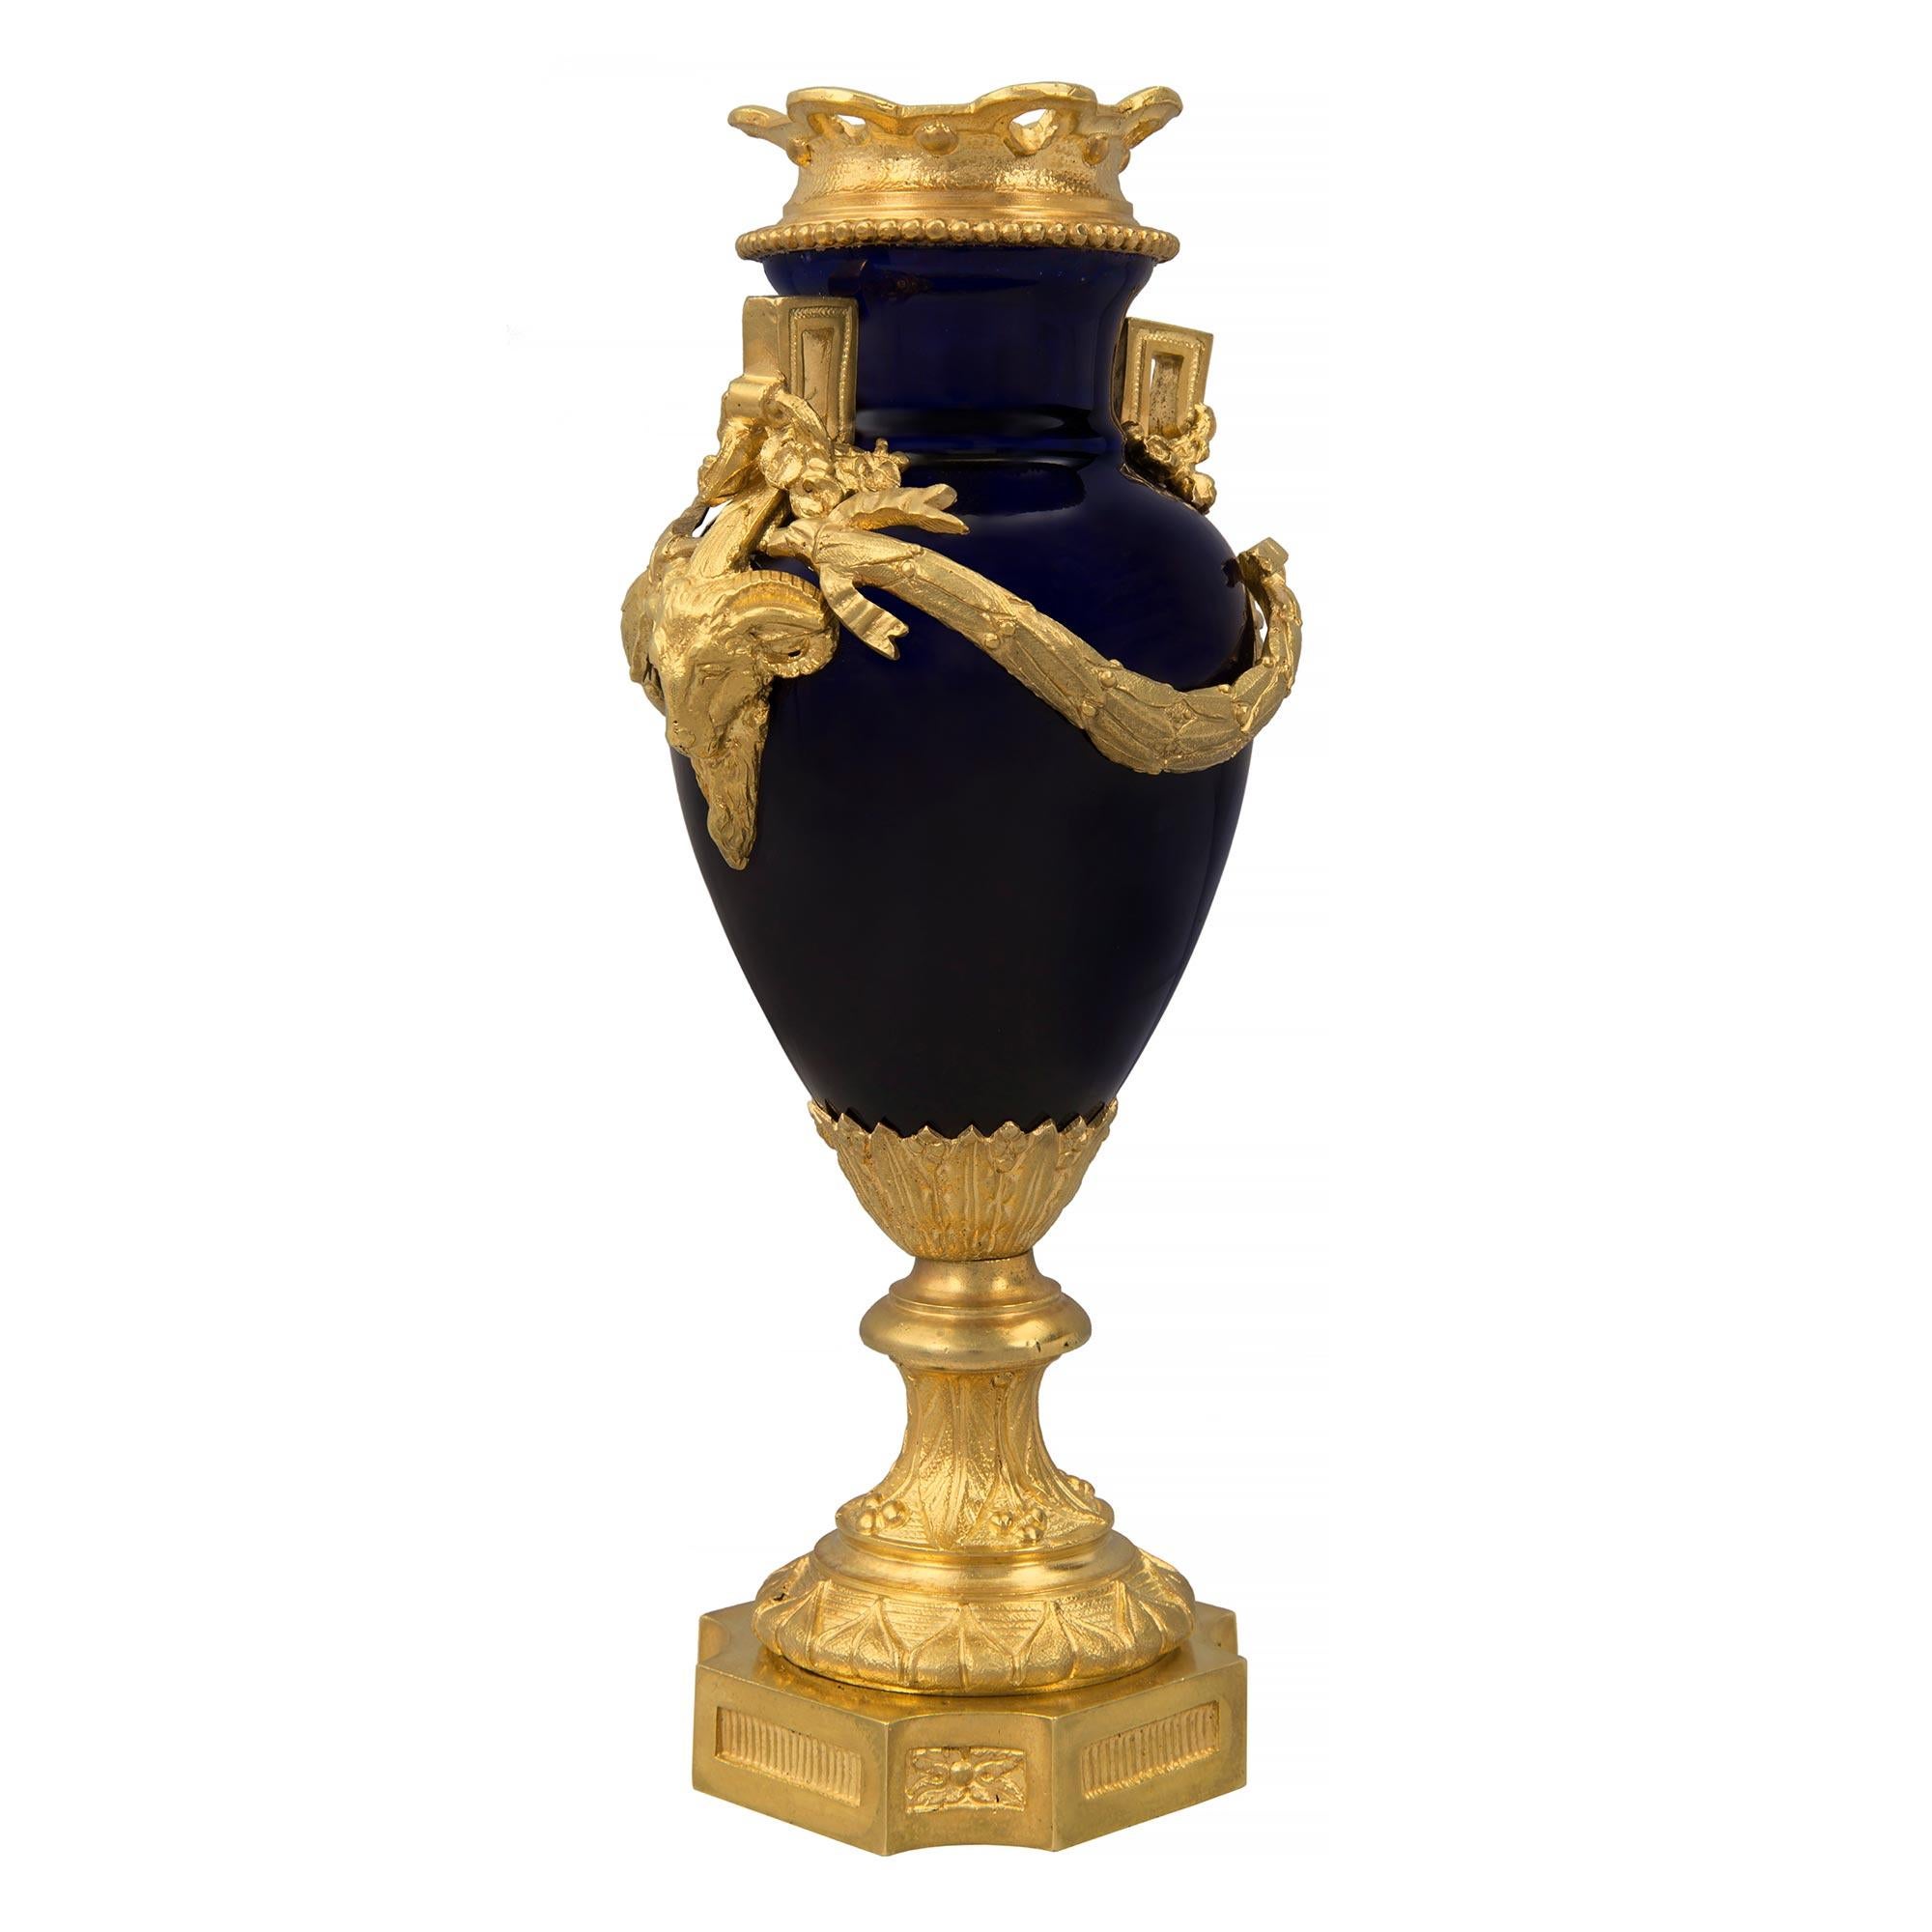 A striking and high quality French 19th century Louis XVI st. cobalt blue porcelain and ormolu vase, possibly by Sèvres. The vase is raised by a fine square ormolu base with concave corners, lovely recessed fluted plaques and block rosettes. The